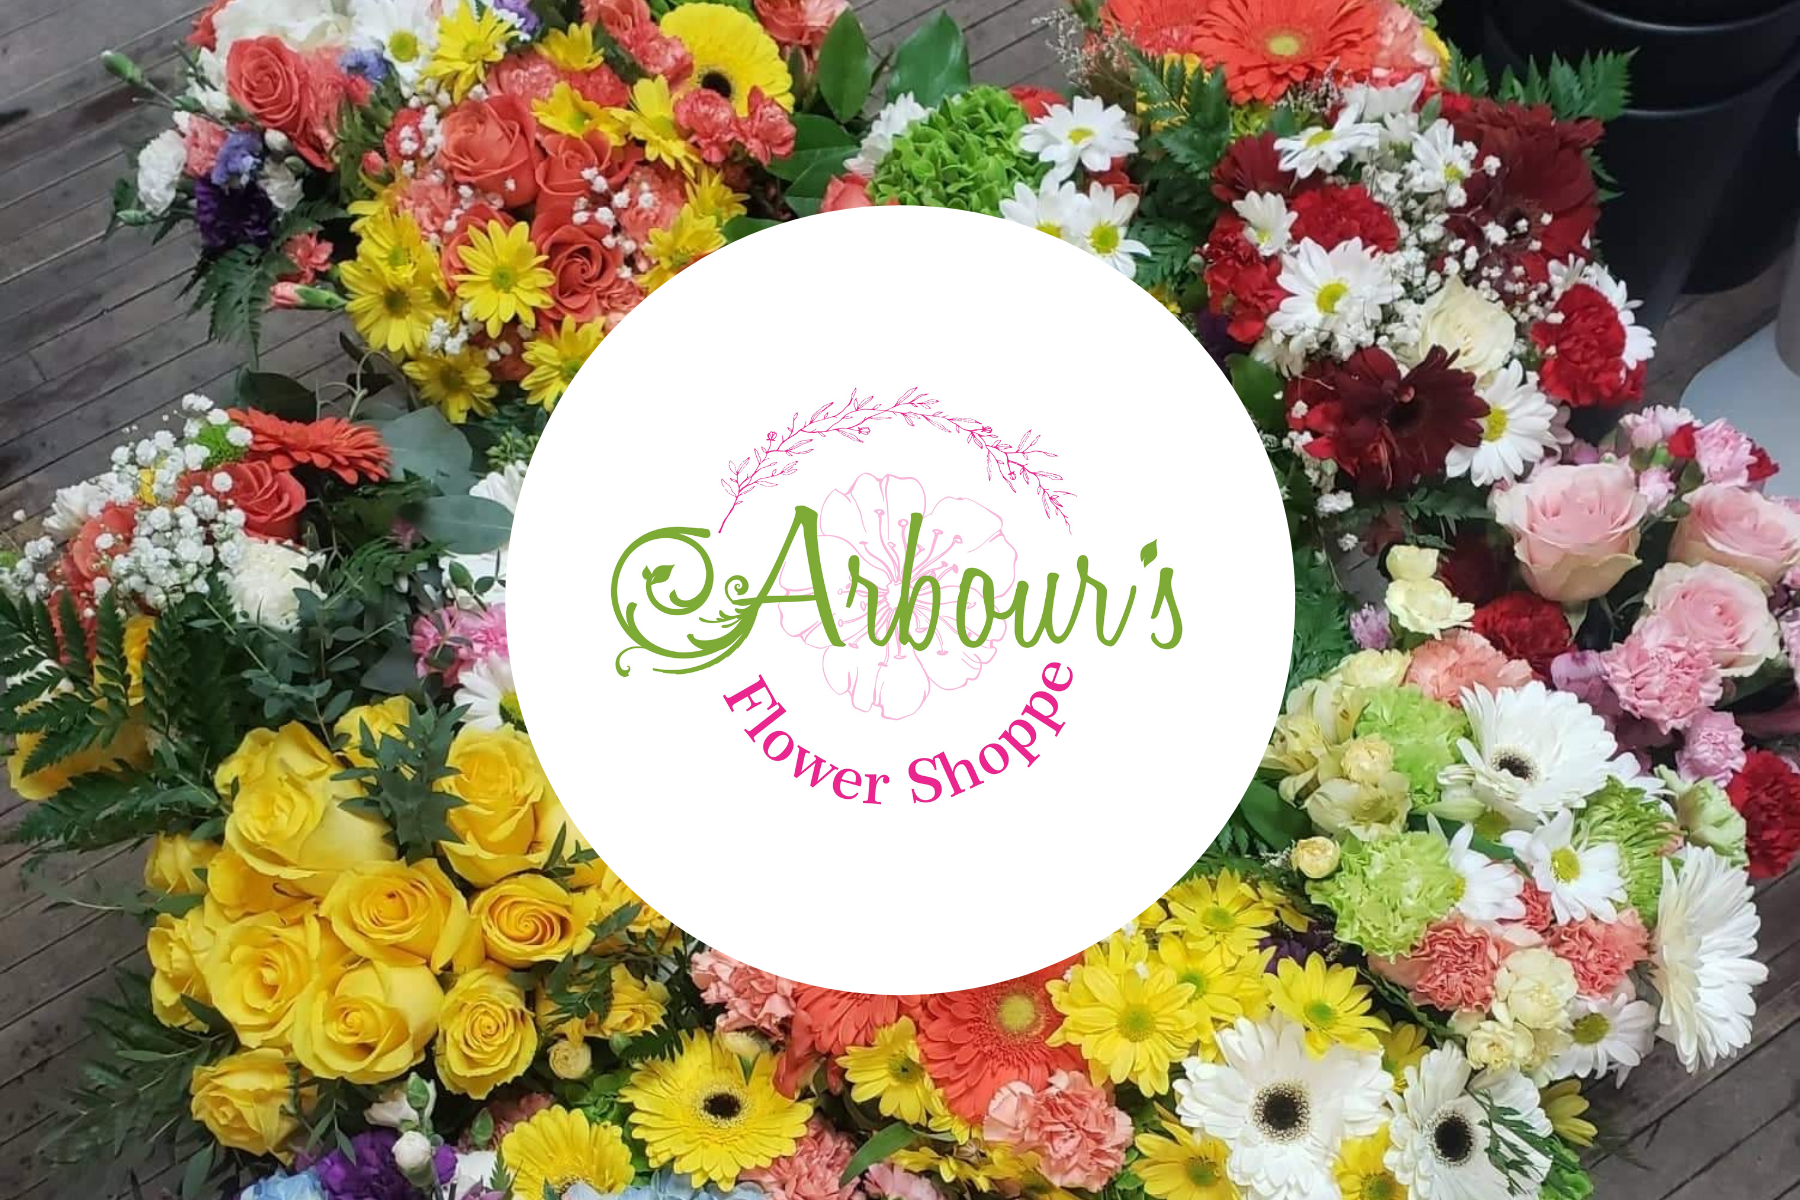 Arbours Flower Shoppe logo with colourful fresh bouquets surrounding it